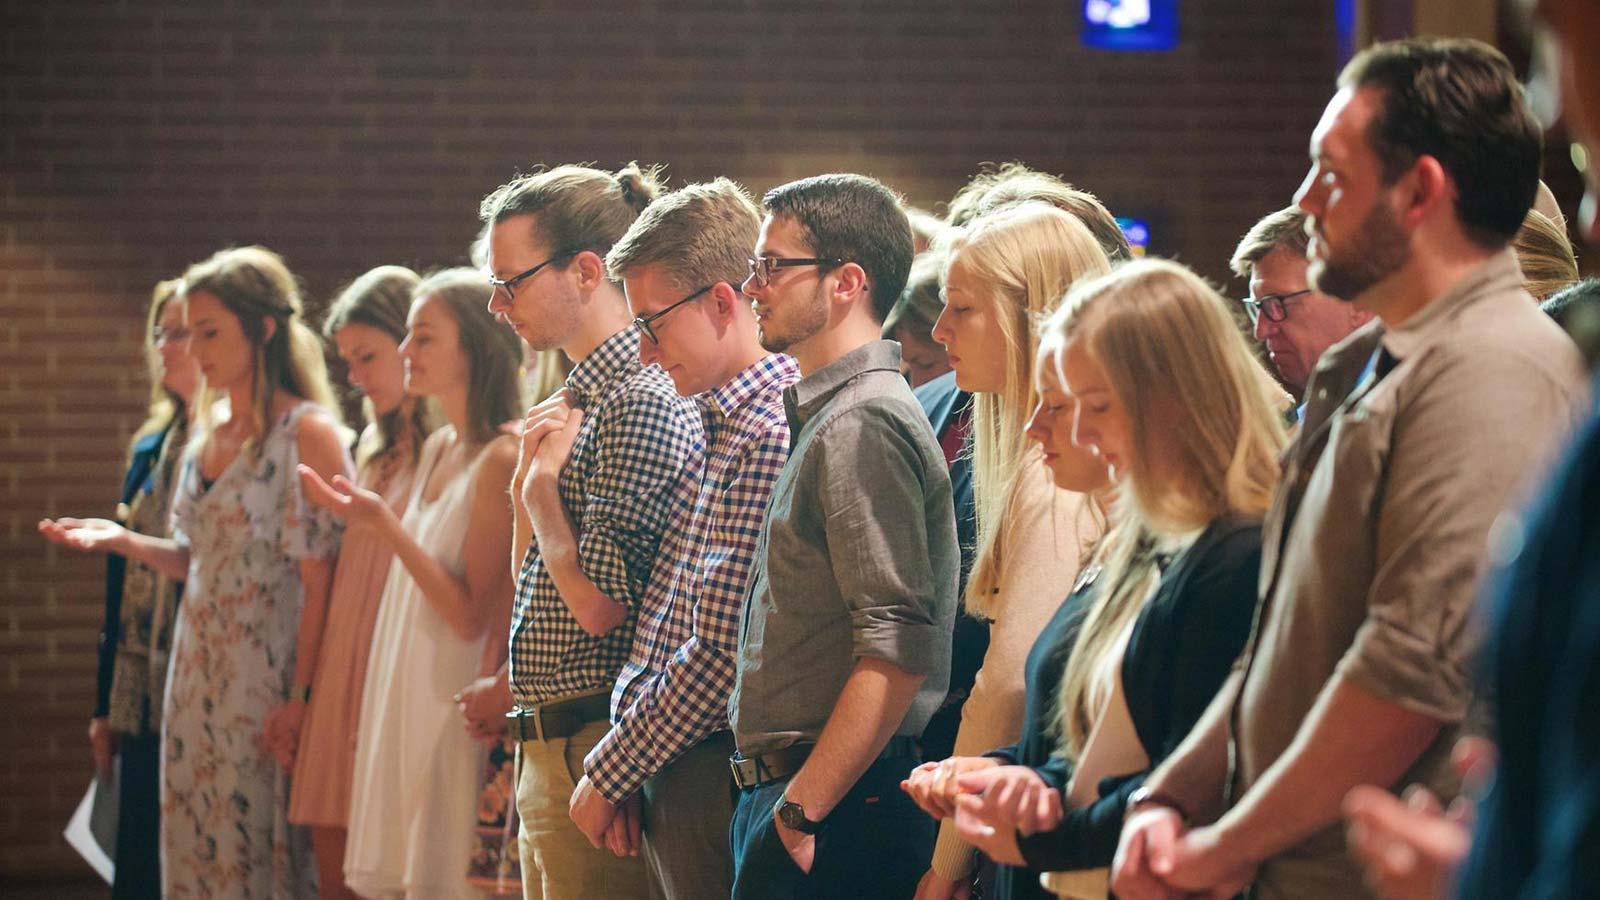 Students in a worship service